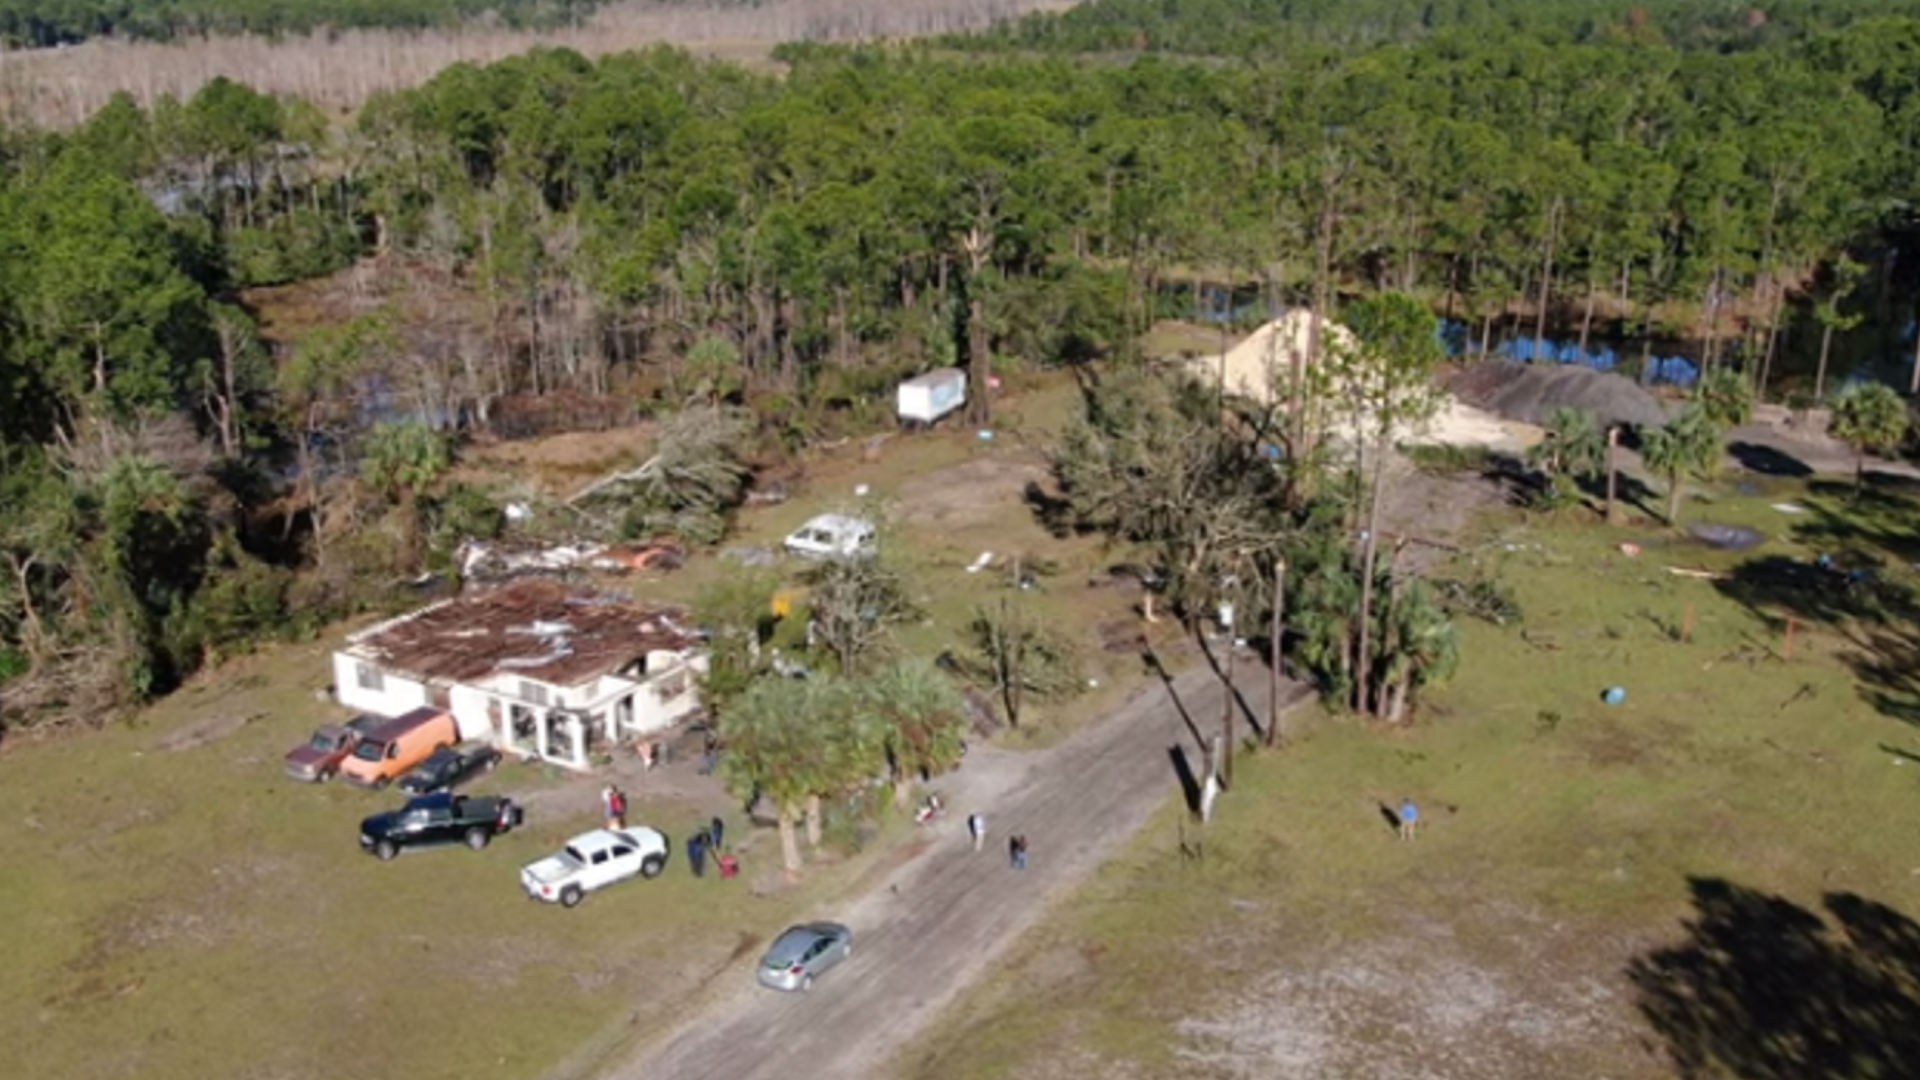 Drone video captured some of the damage caused by an EF-1 tornado early Saturday, Dec. 14, 2019, in Flagler County, Florida.